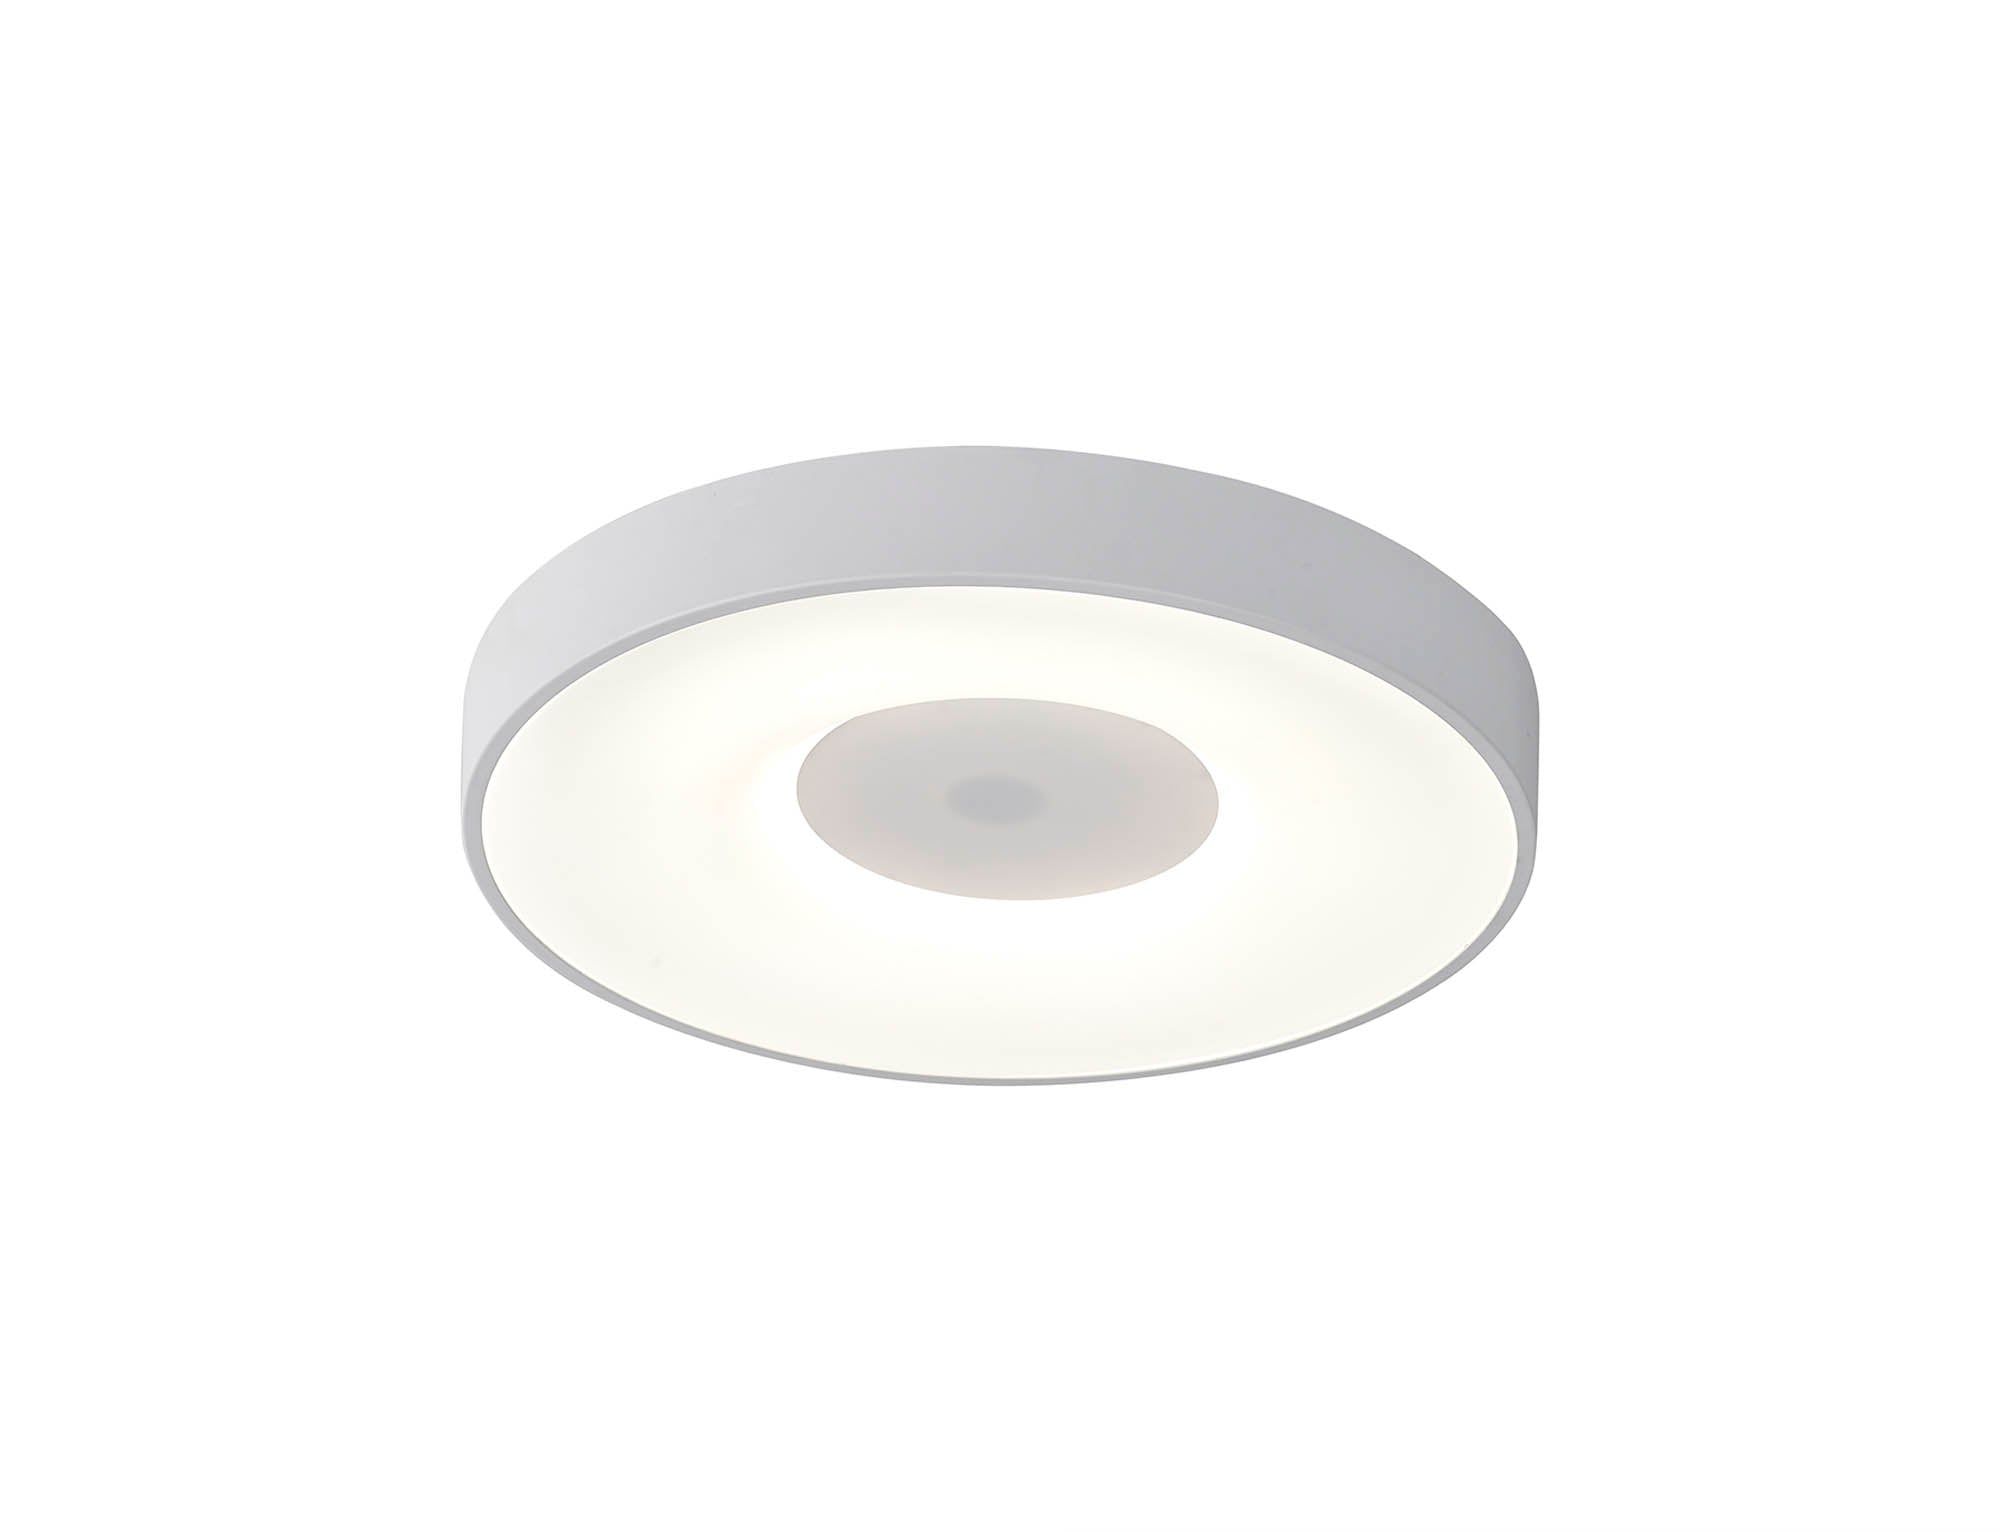 Coin Round Ceiling 80W LED With Remote Control 2700K-5000K, 3900lm, White, 3yrs Warranty